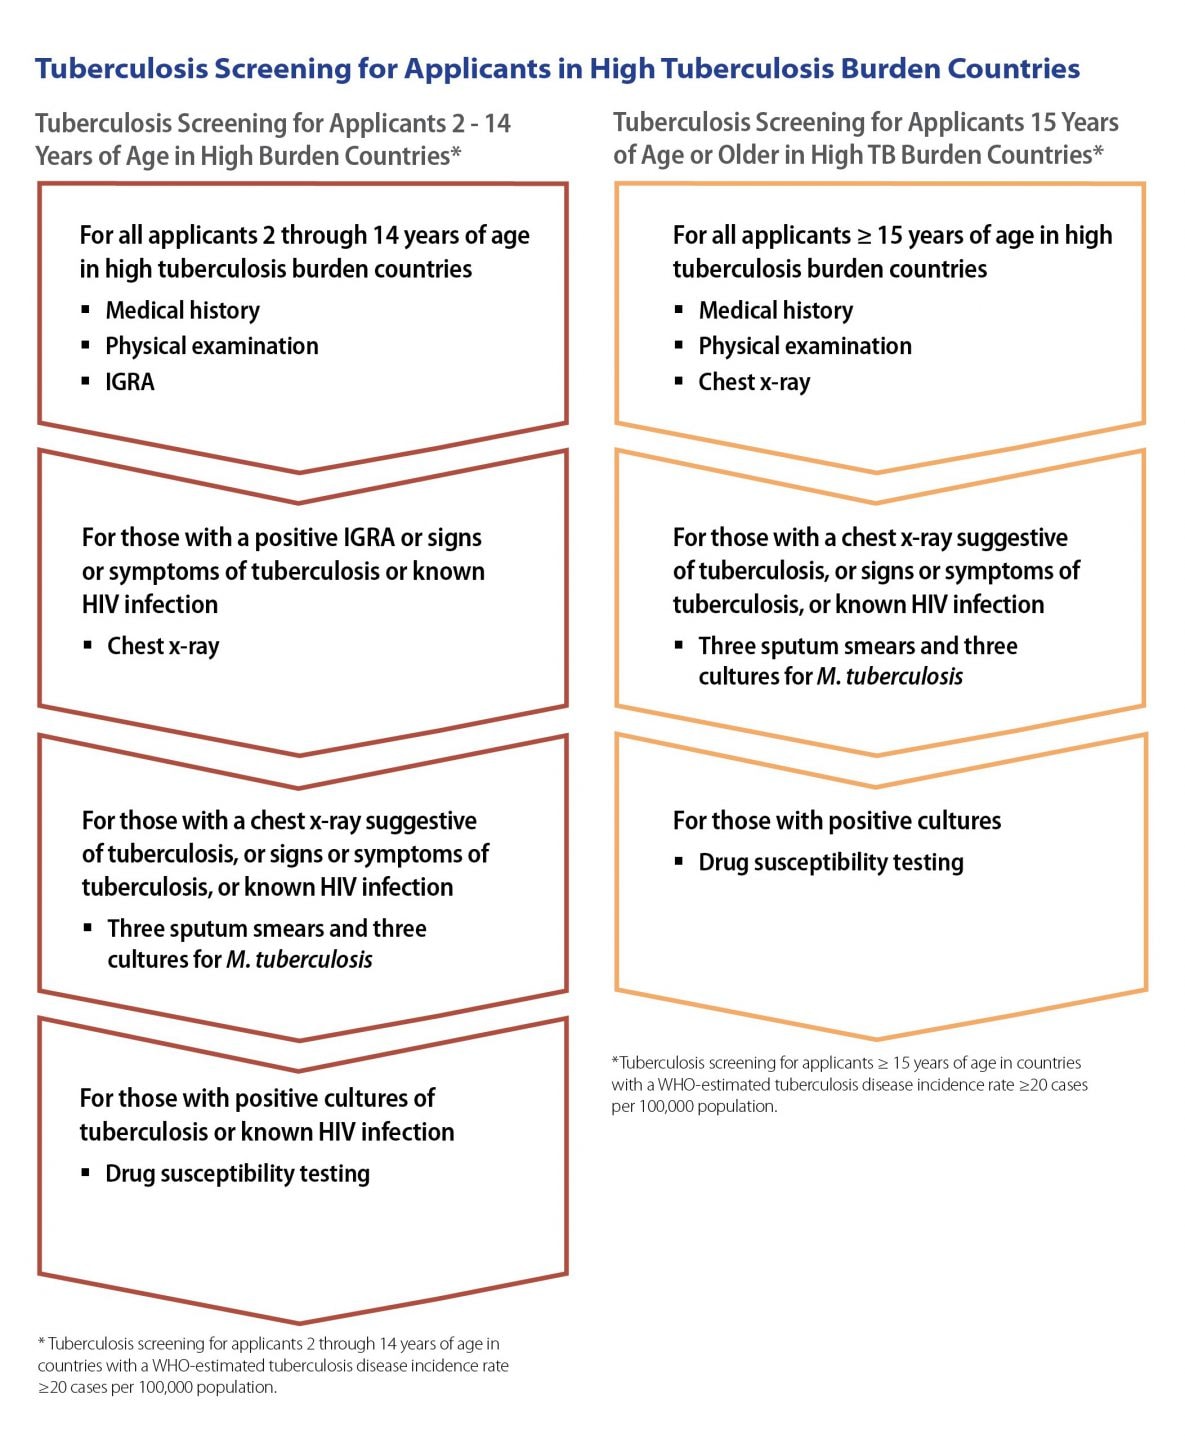 Figure 2: Tuberculosis Screening for Applicants in High Tuberculosis Burden Countries